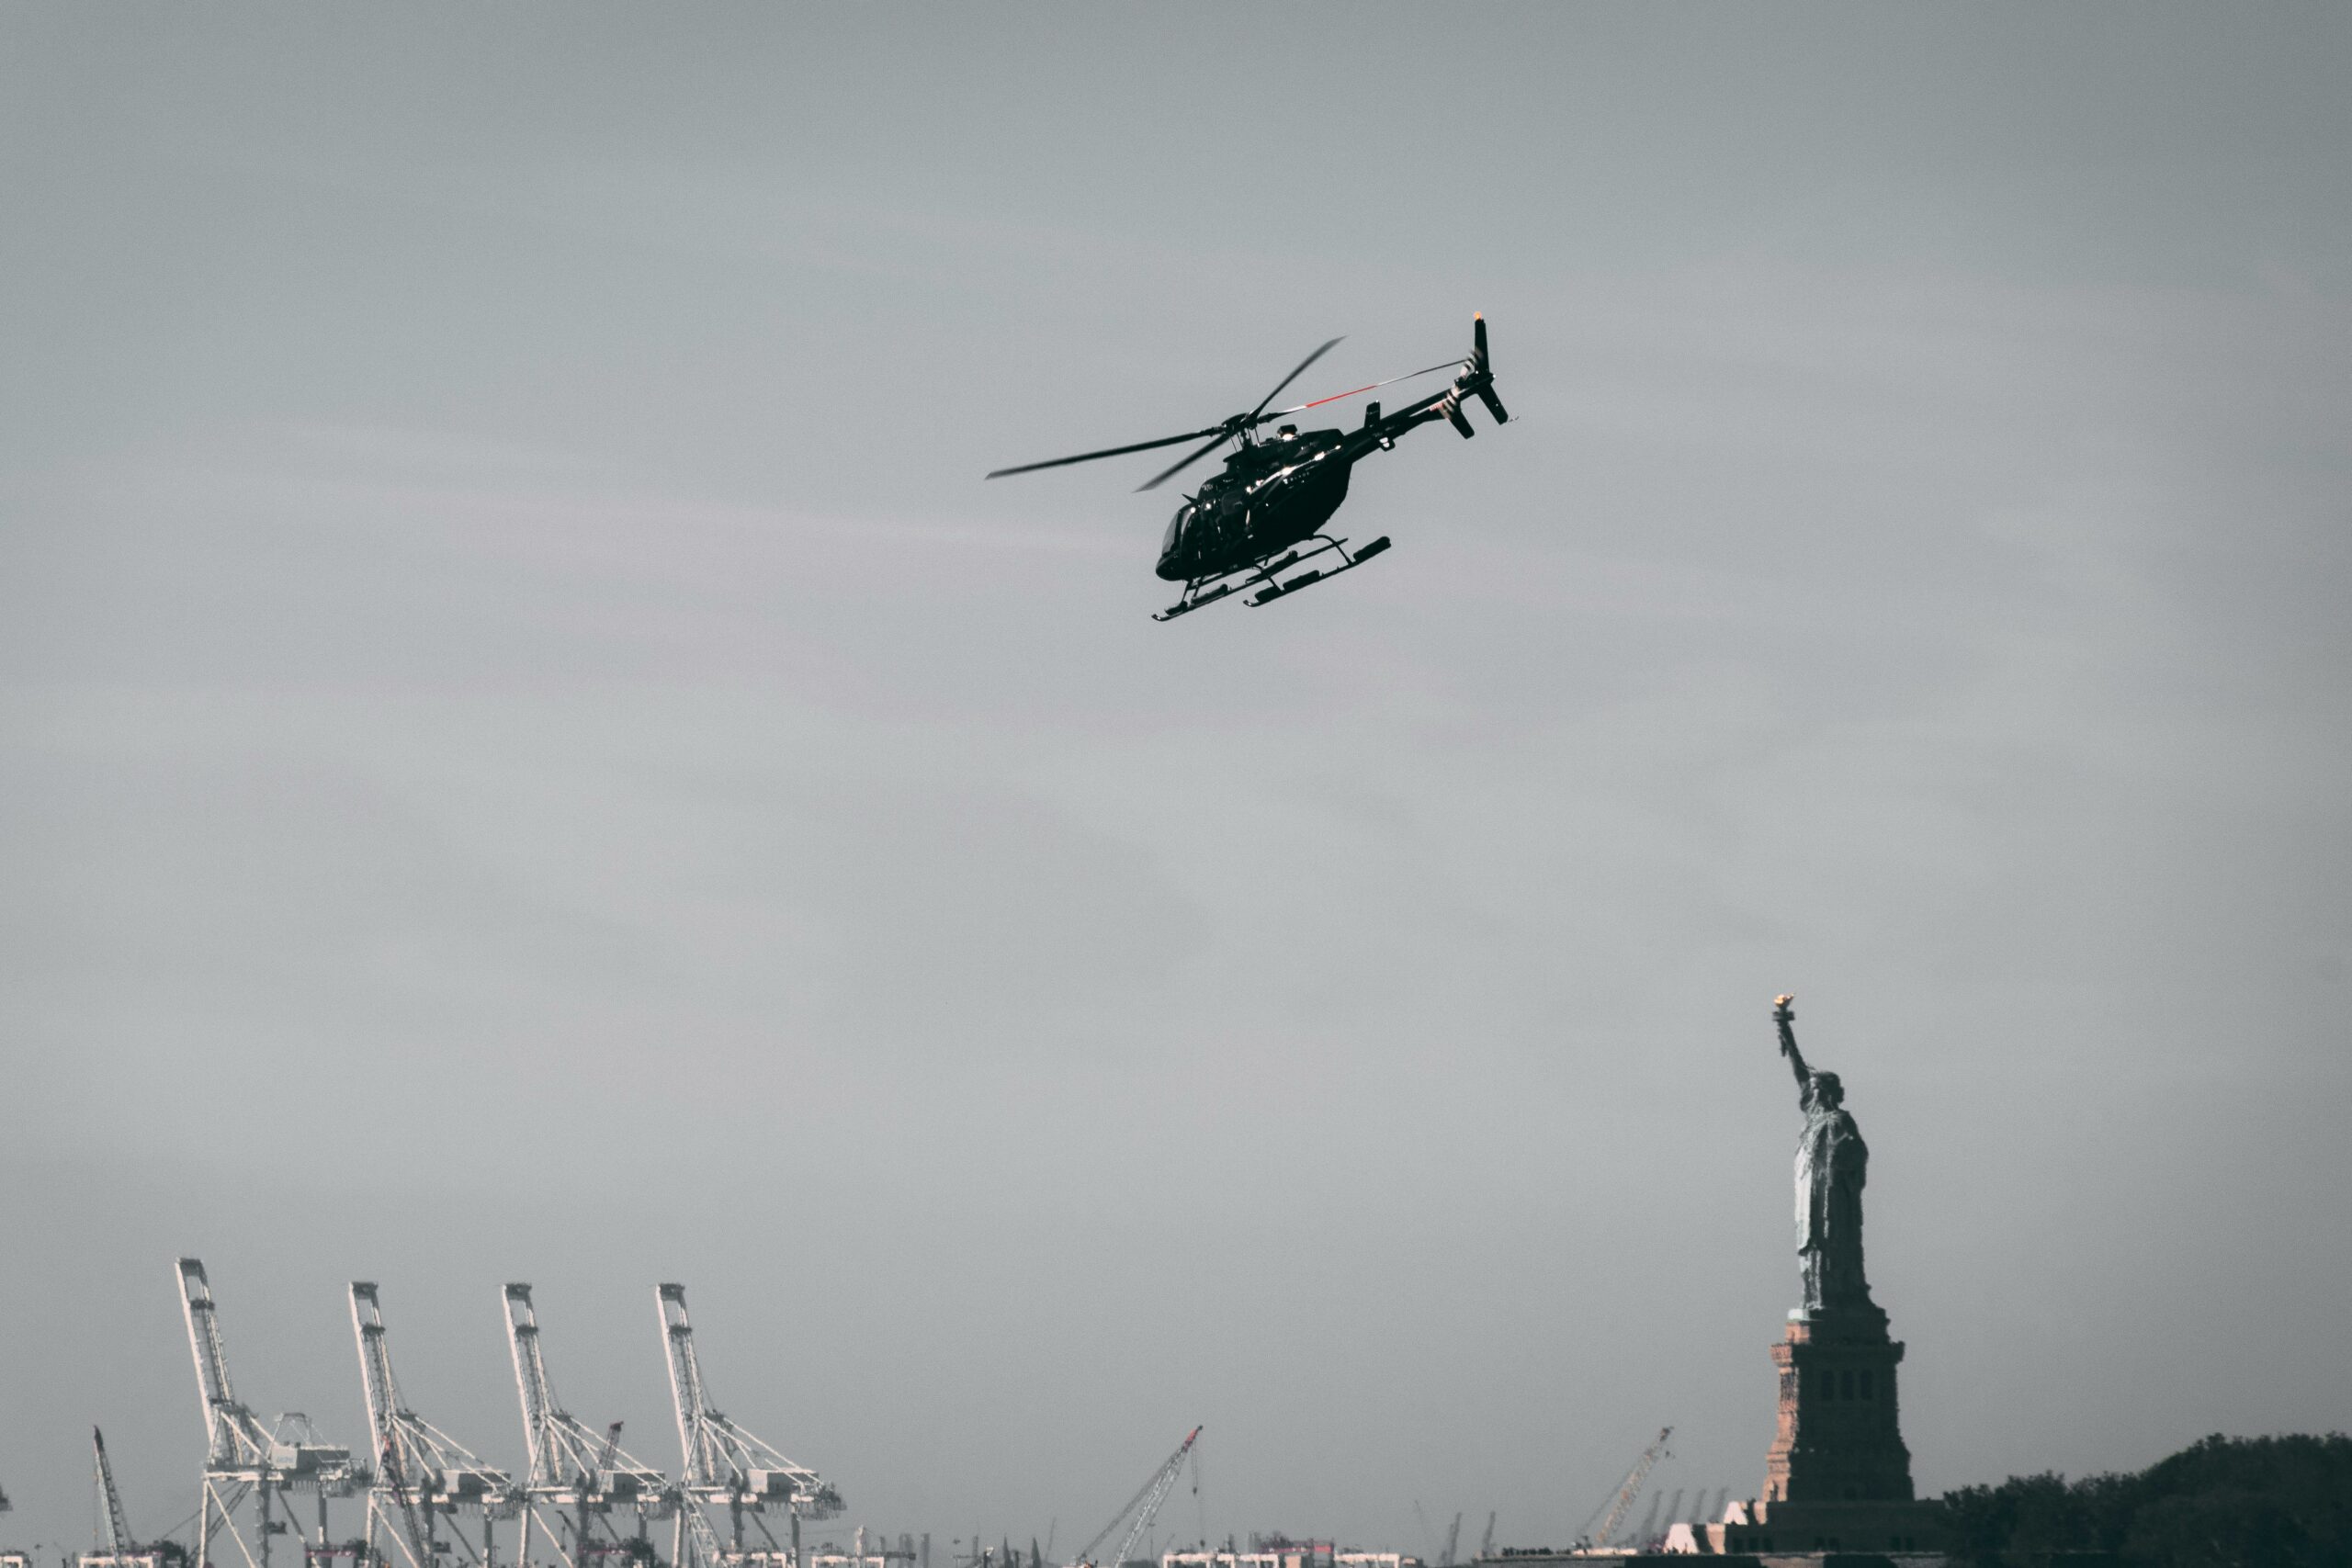 From helicopters to fireworks: NYC’s noise pollution may be harming your health